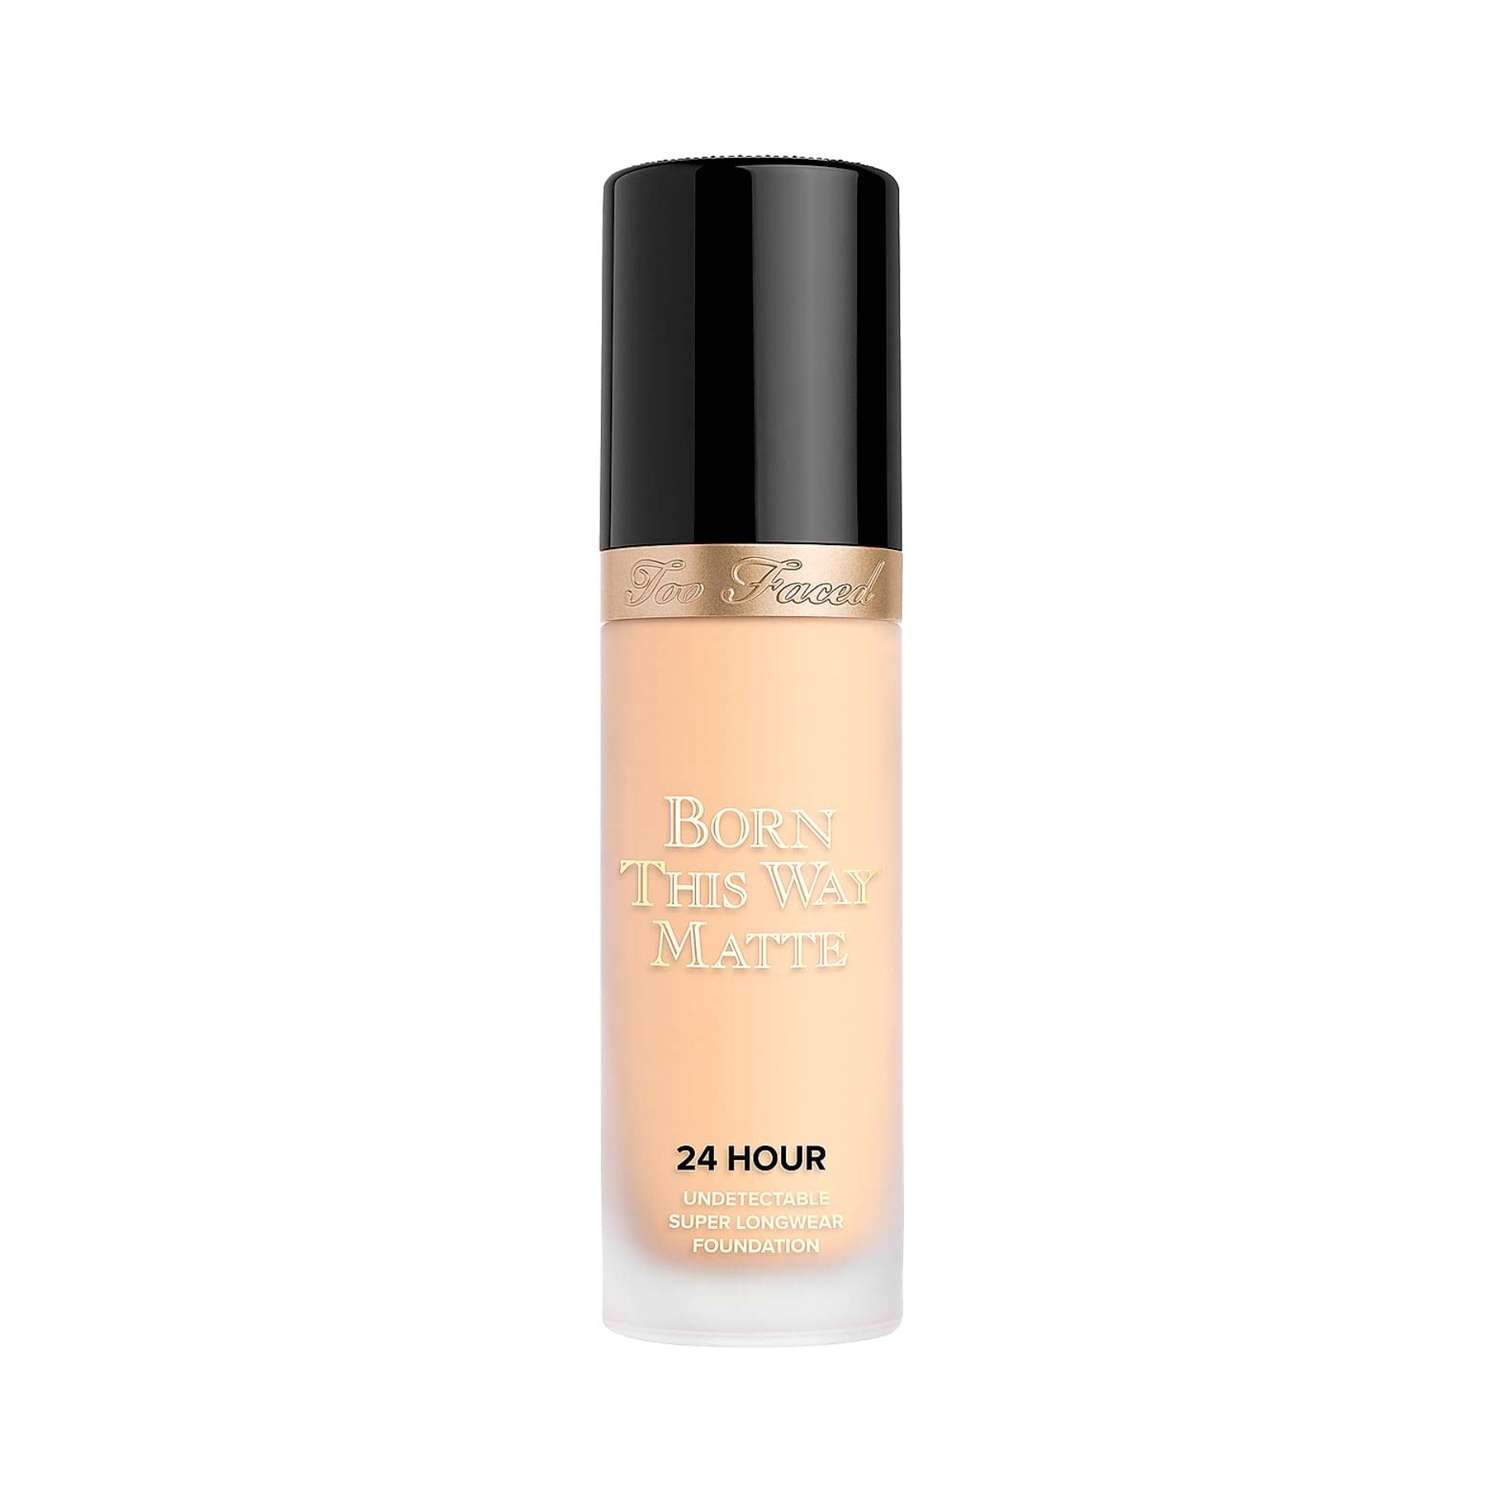 Too Faced | Too Faced Born This Way 24-Hour Longwear Matte Foundation - Warm Beige (30ml)